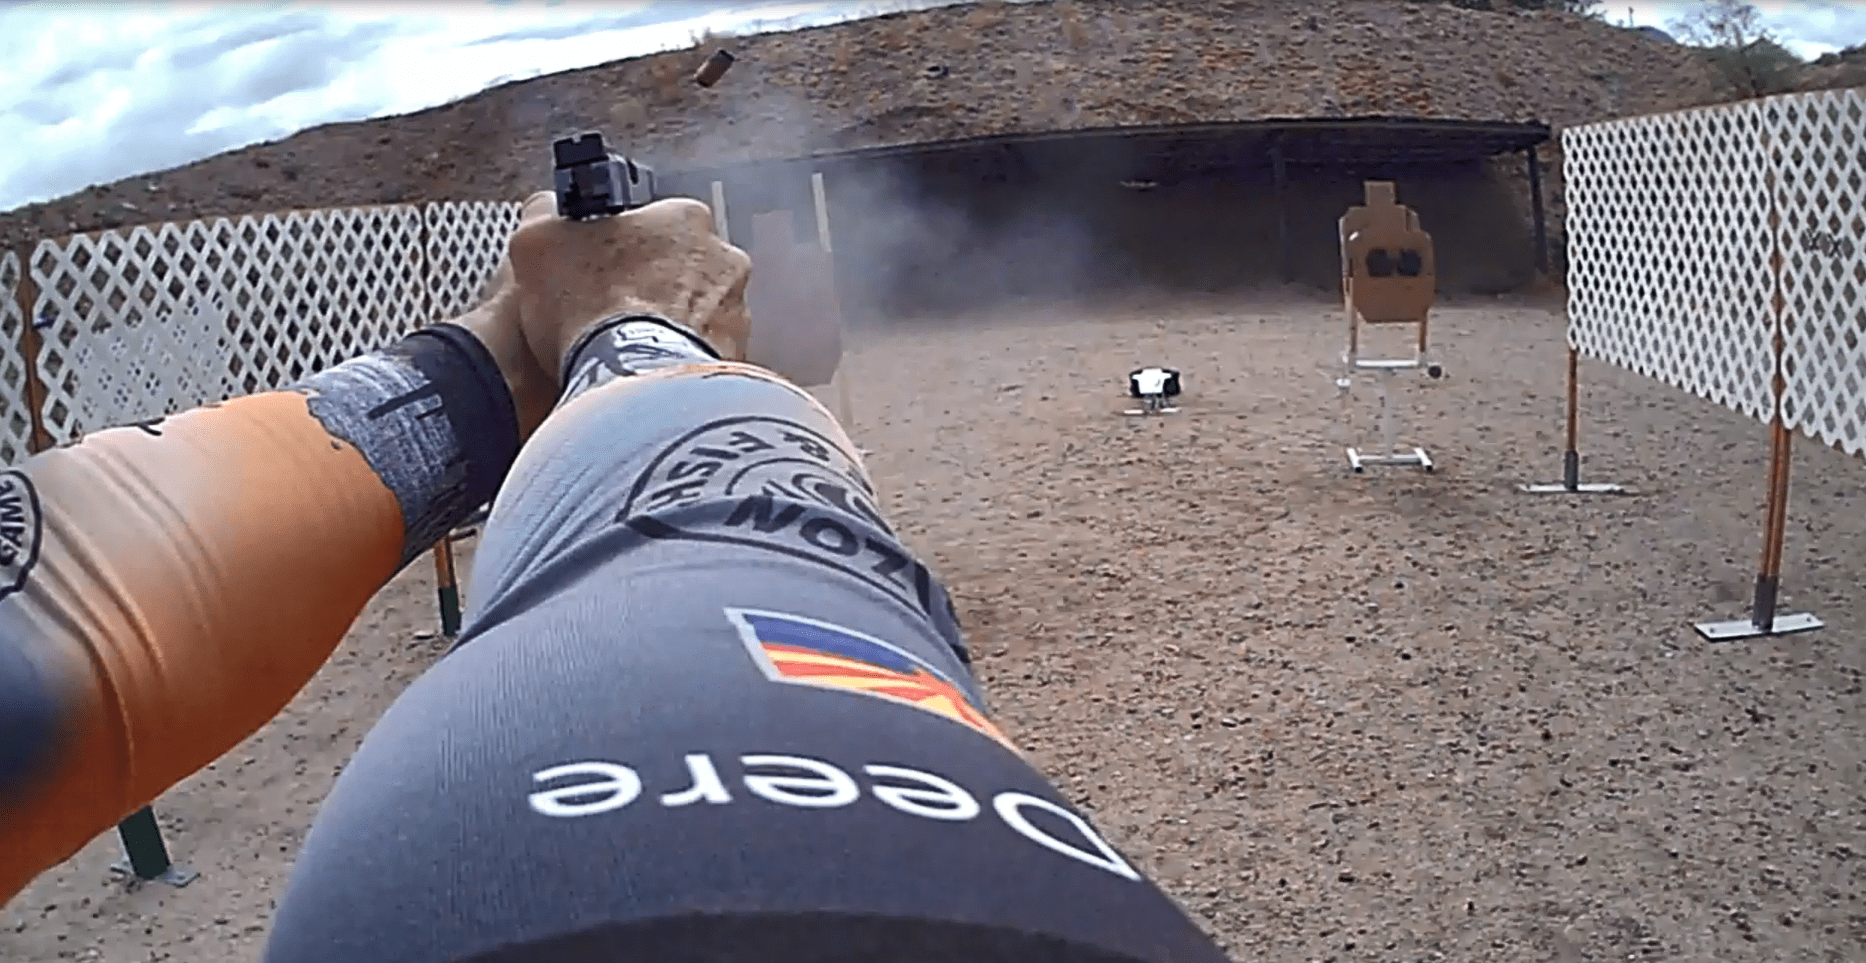 competitive shooting event